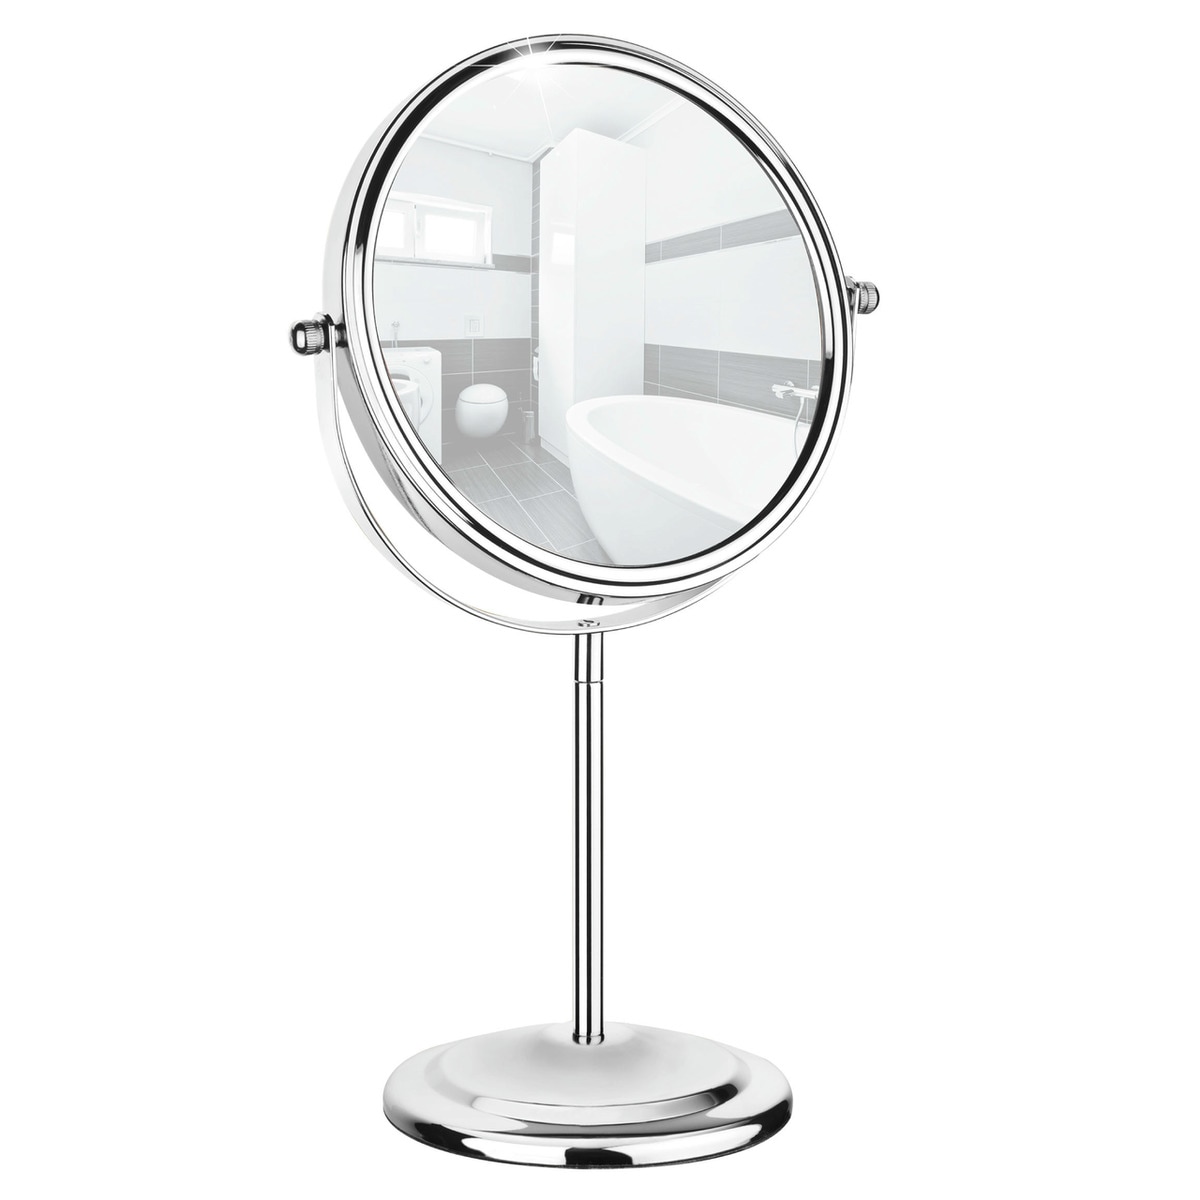 Maximex Cosmetic mirror with 7x magnification